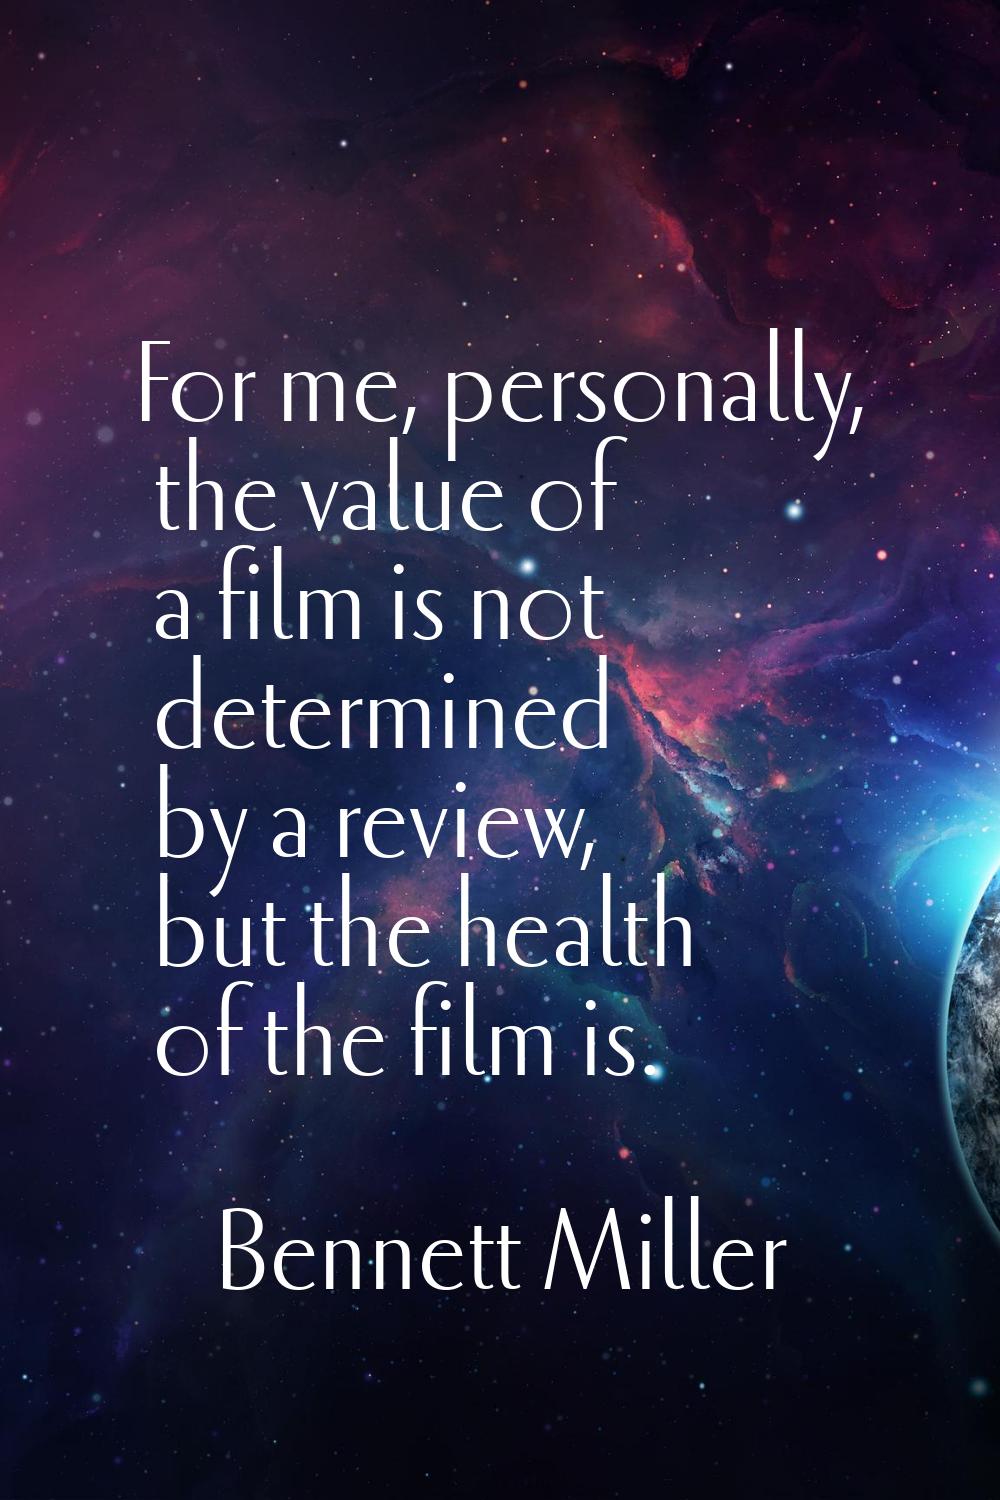 For me, personally, the value of a film is not determined by a review, but the health of the film i